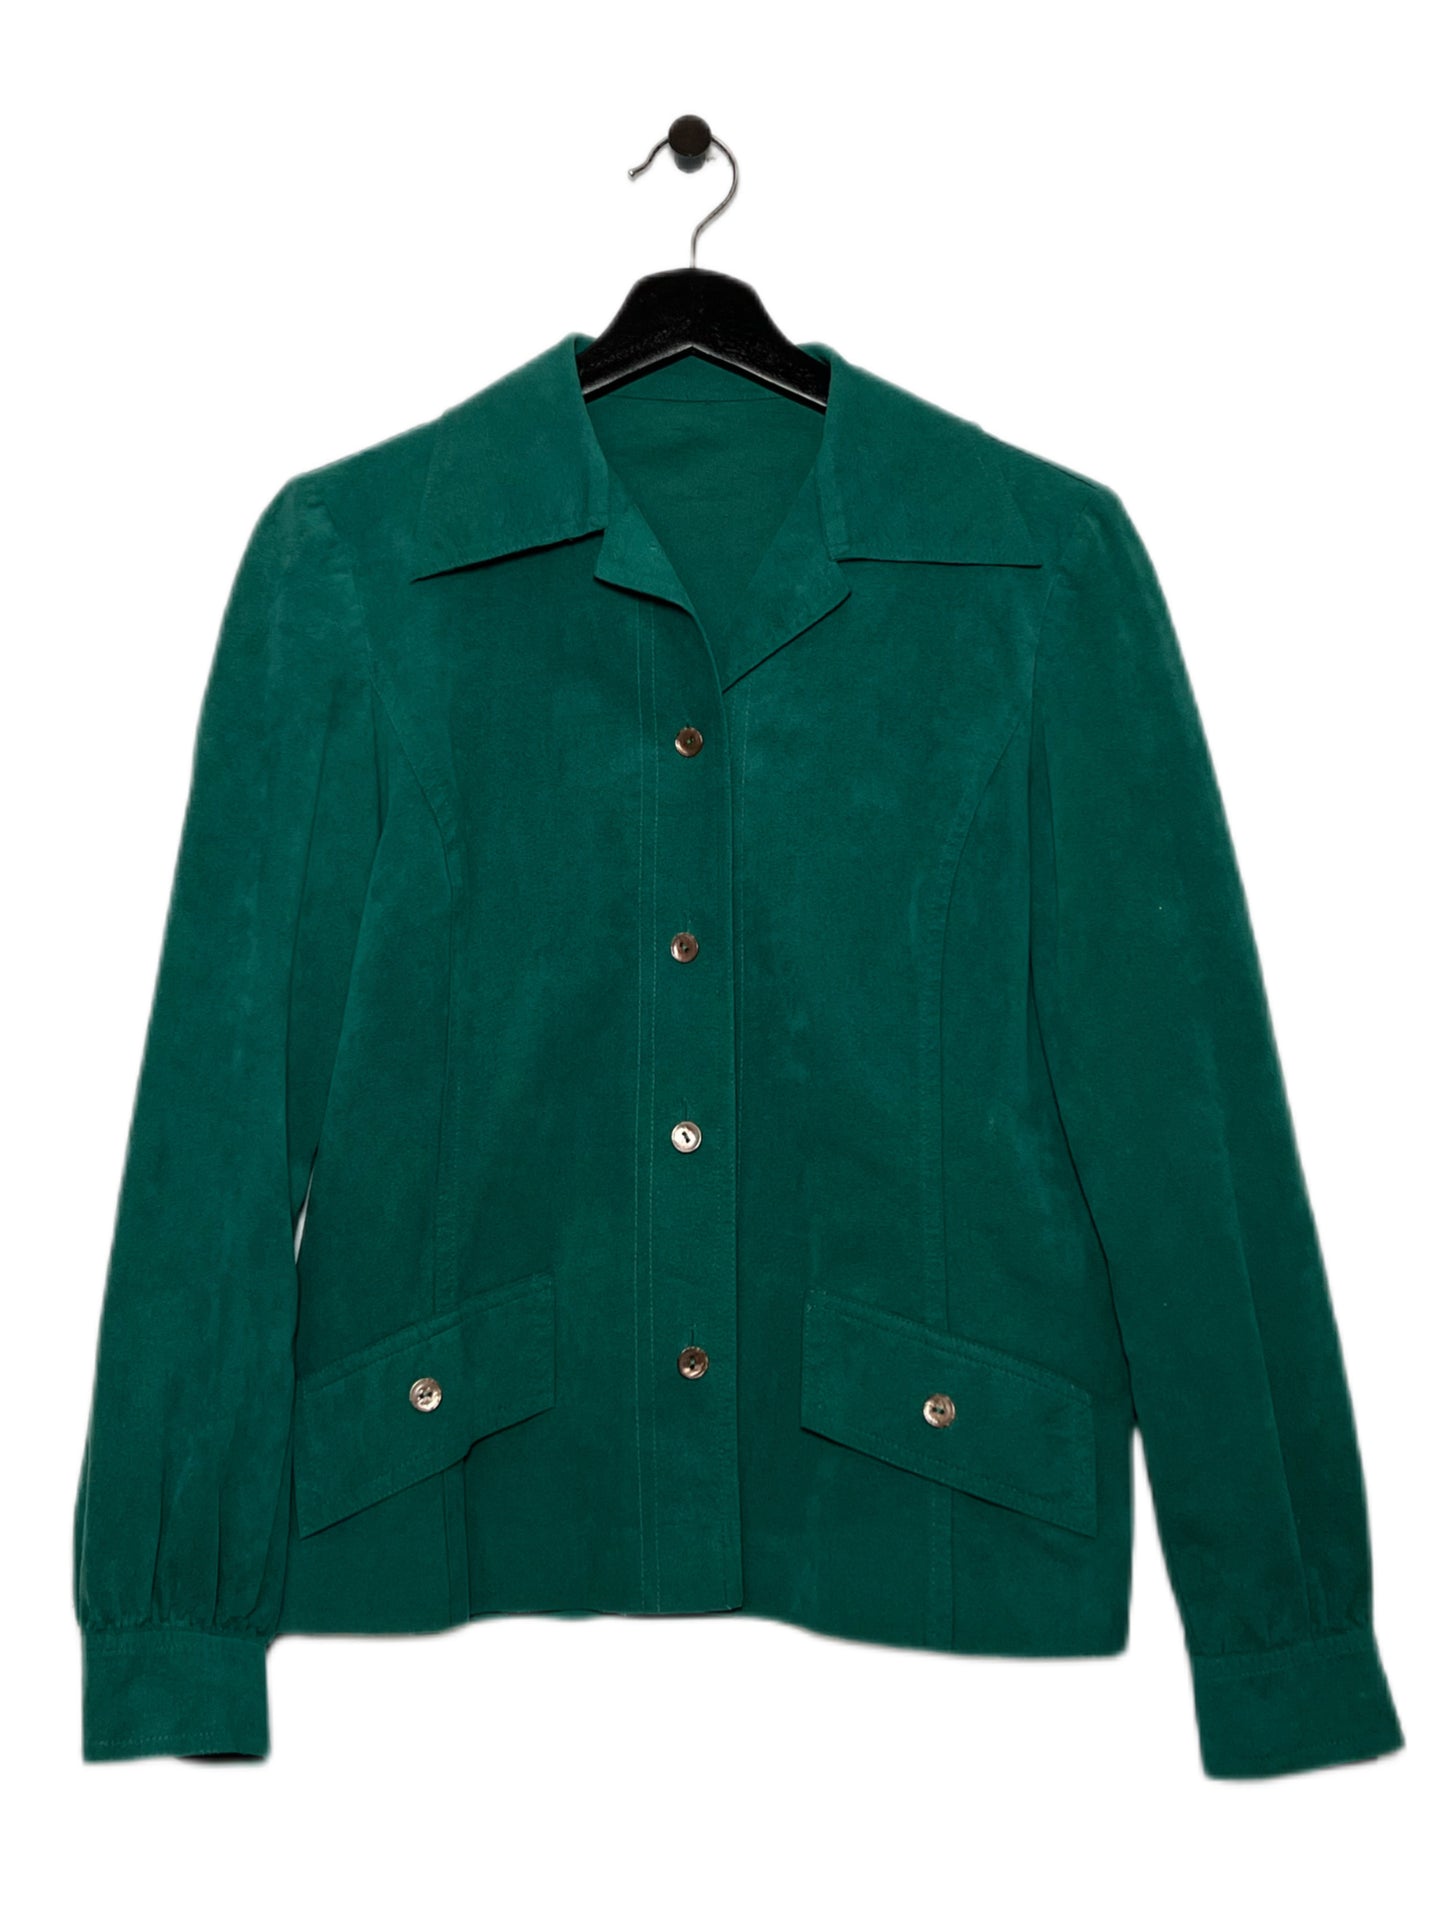 Teal Suede Button Up Shirt